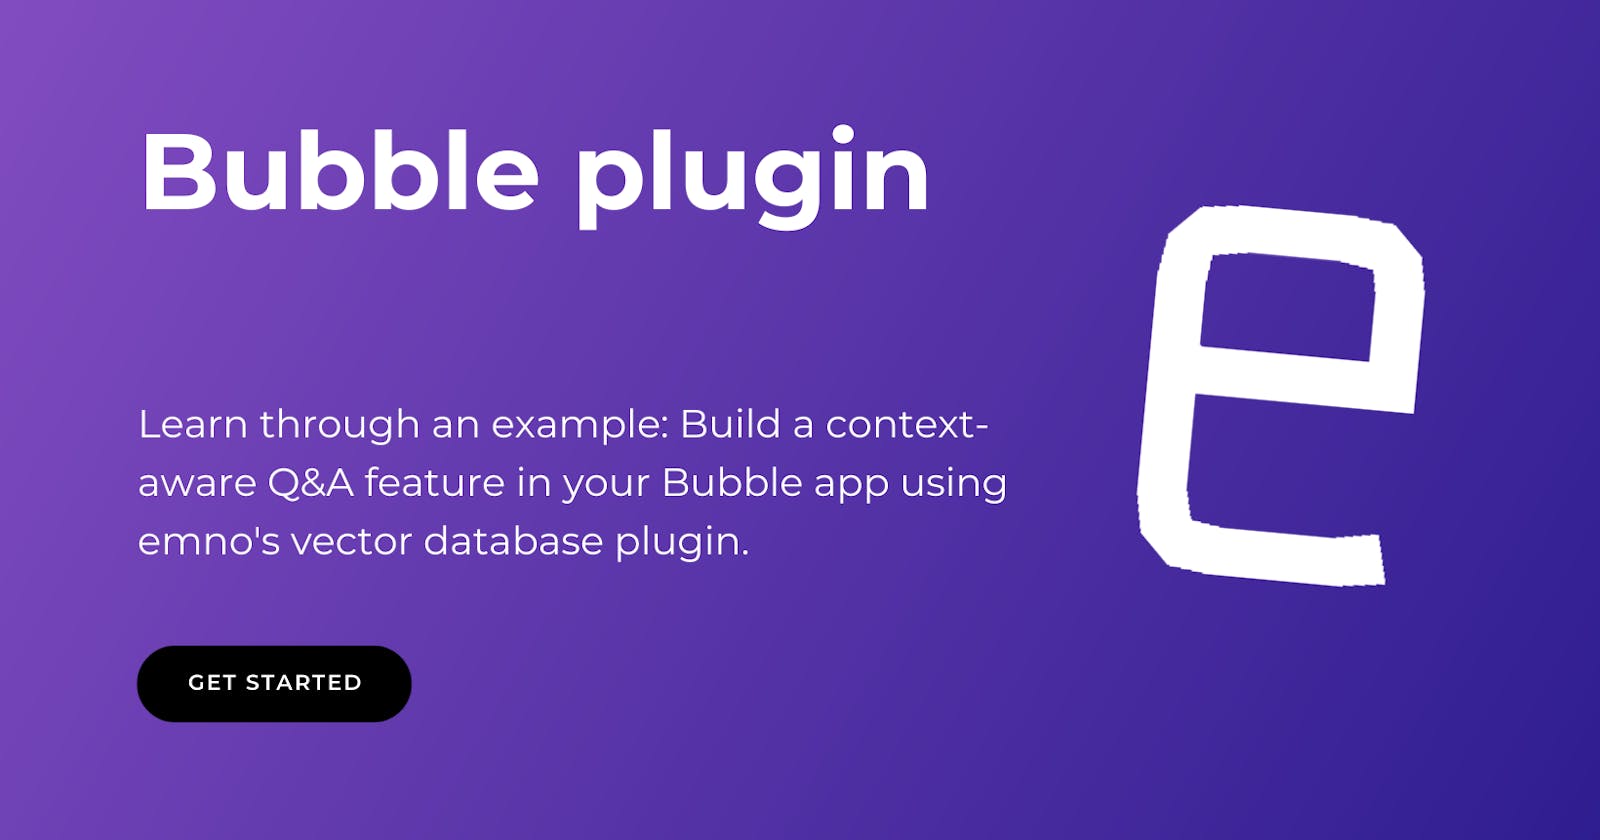 Boost Your Bubble Apps' Functionality with emno vector database Plugin